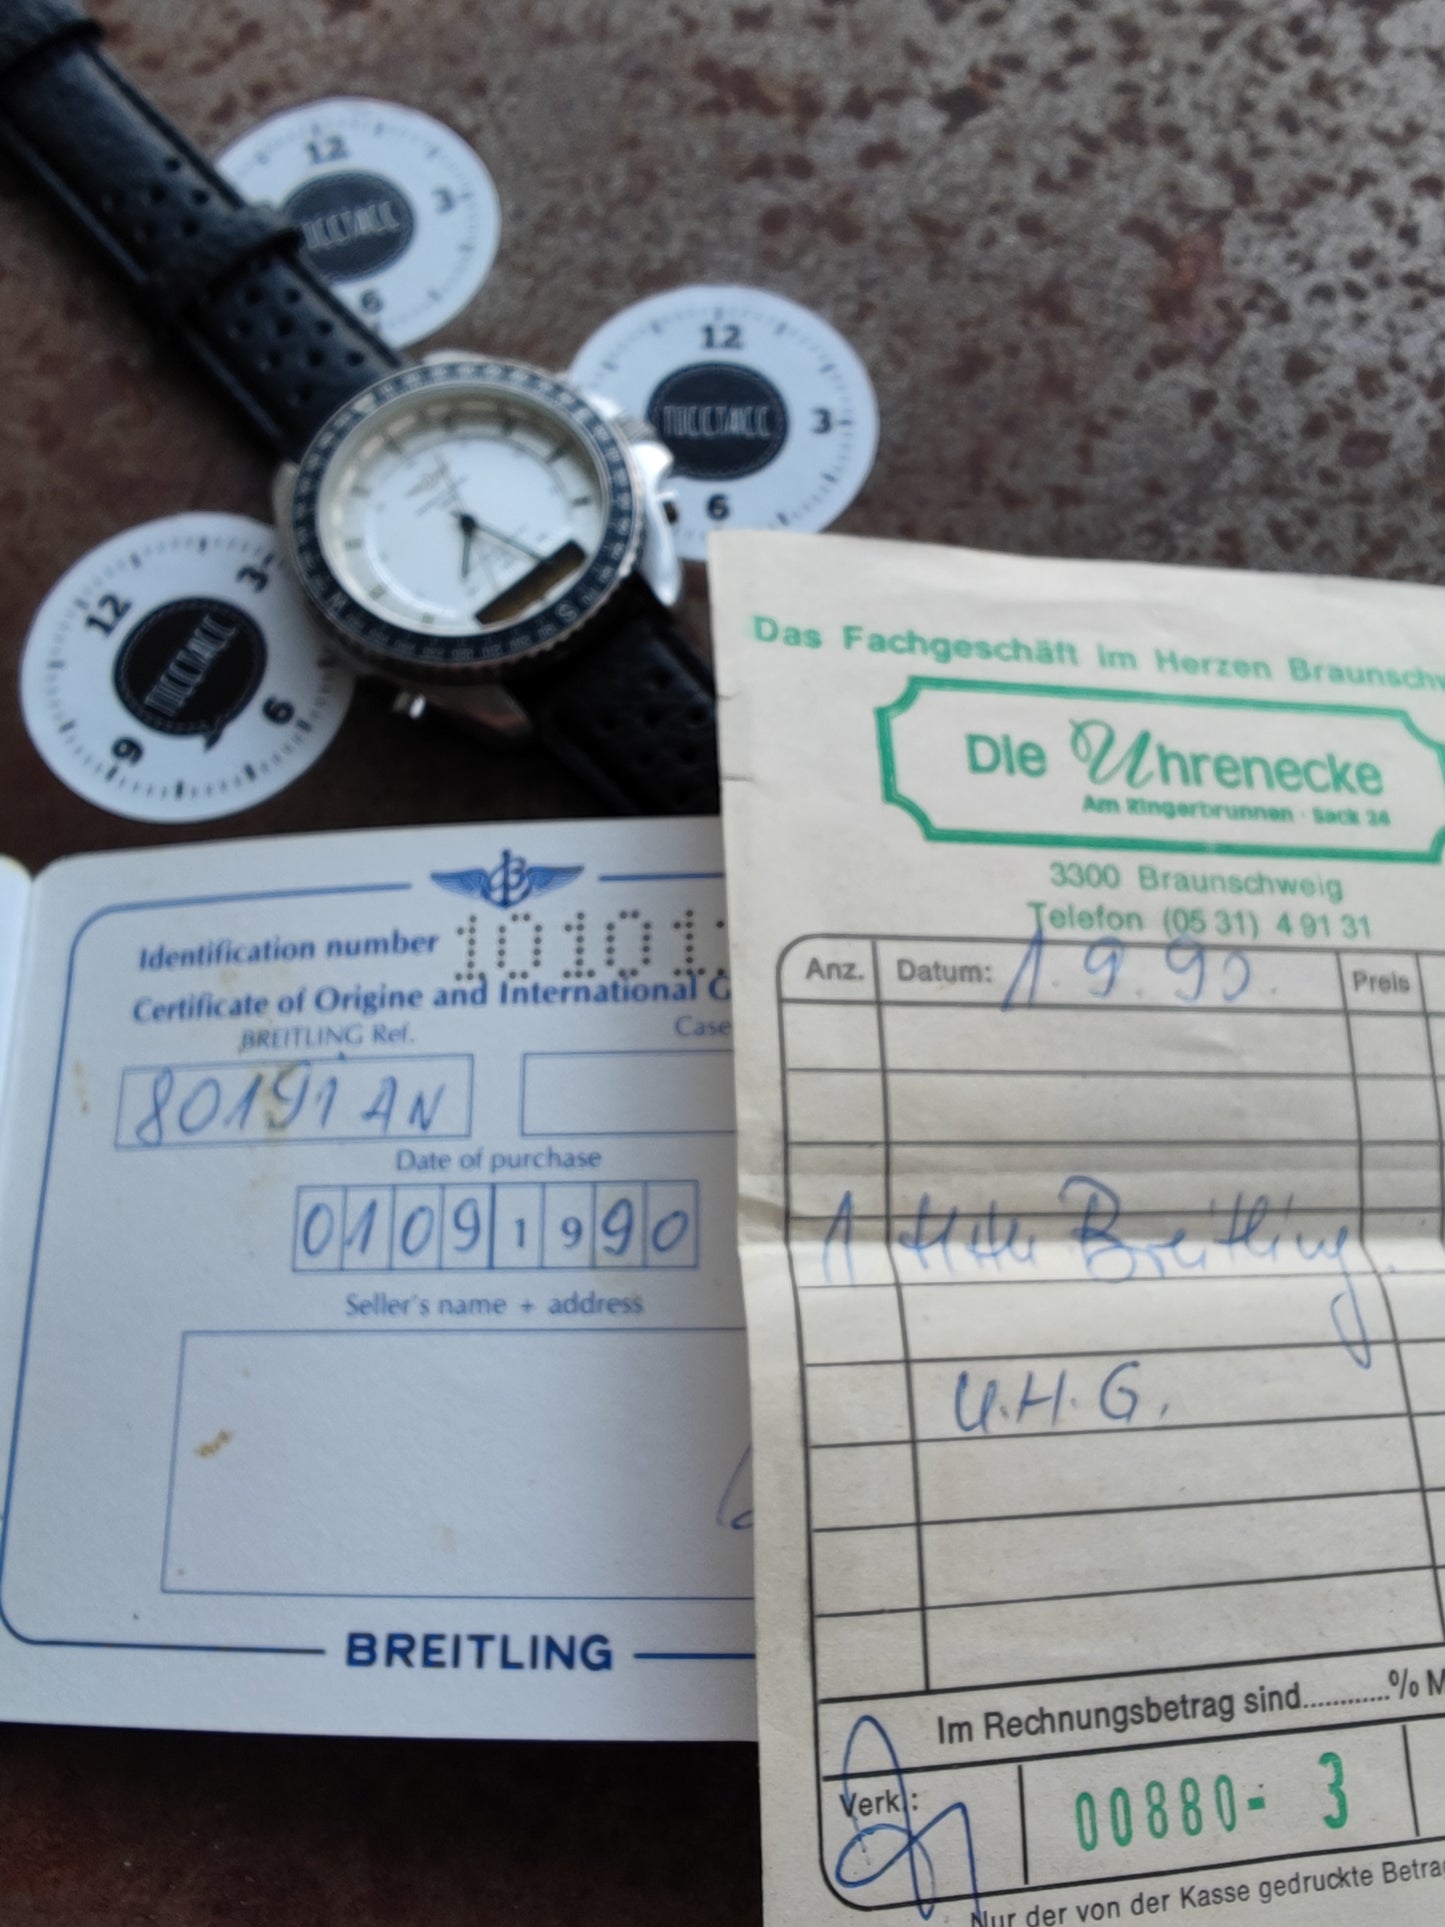 Breitling Navitimer Pluton 80191 3100 - Service SEPT 2023 & Papers & Box